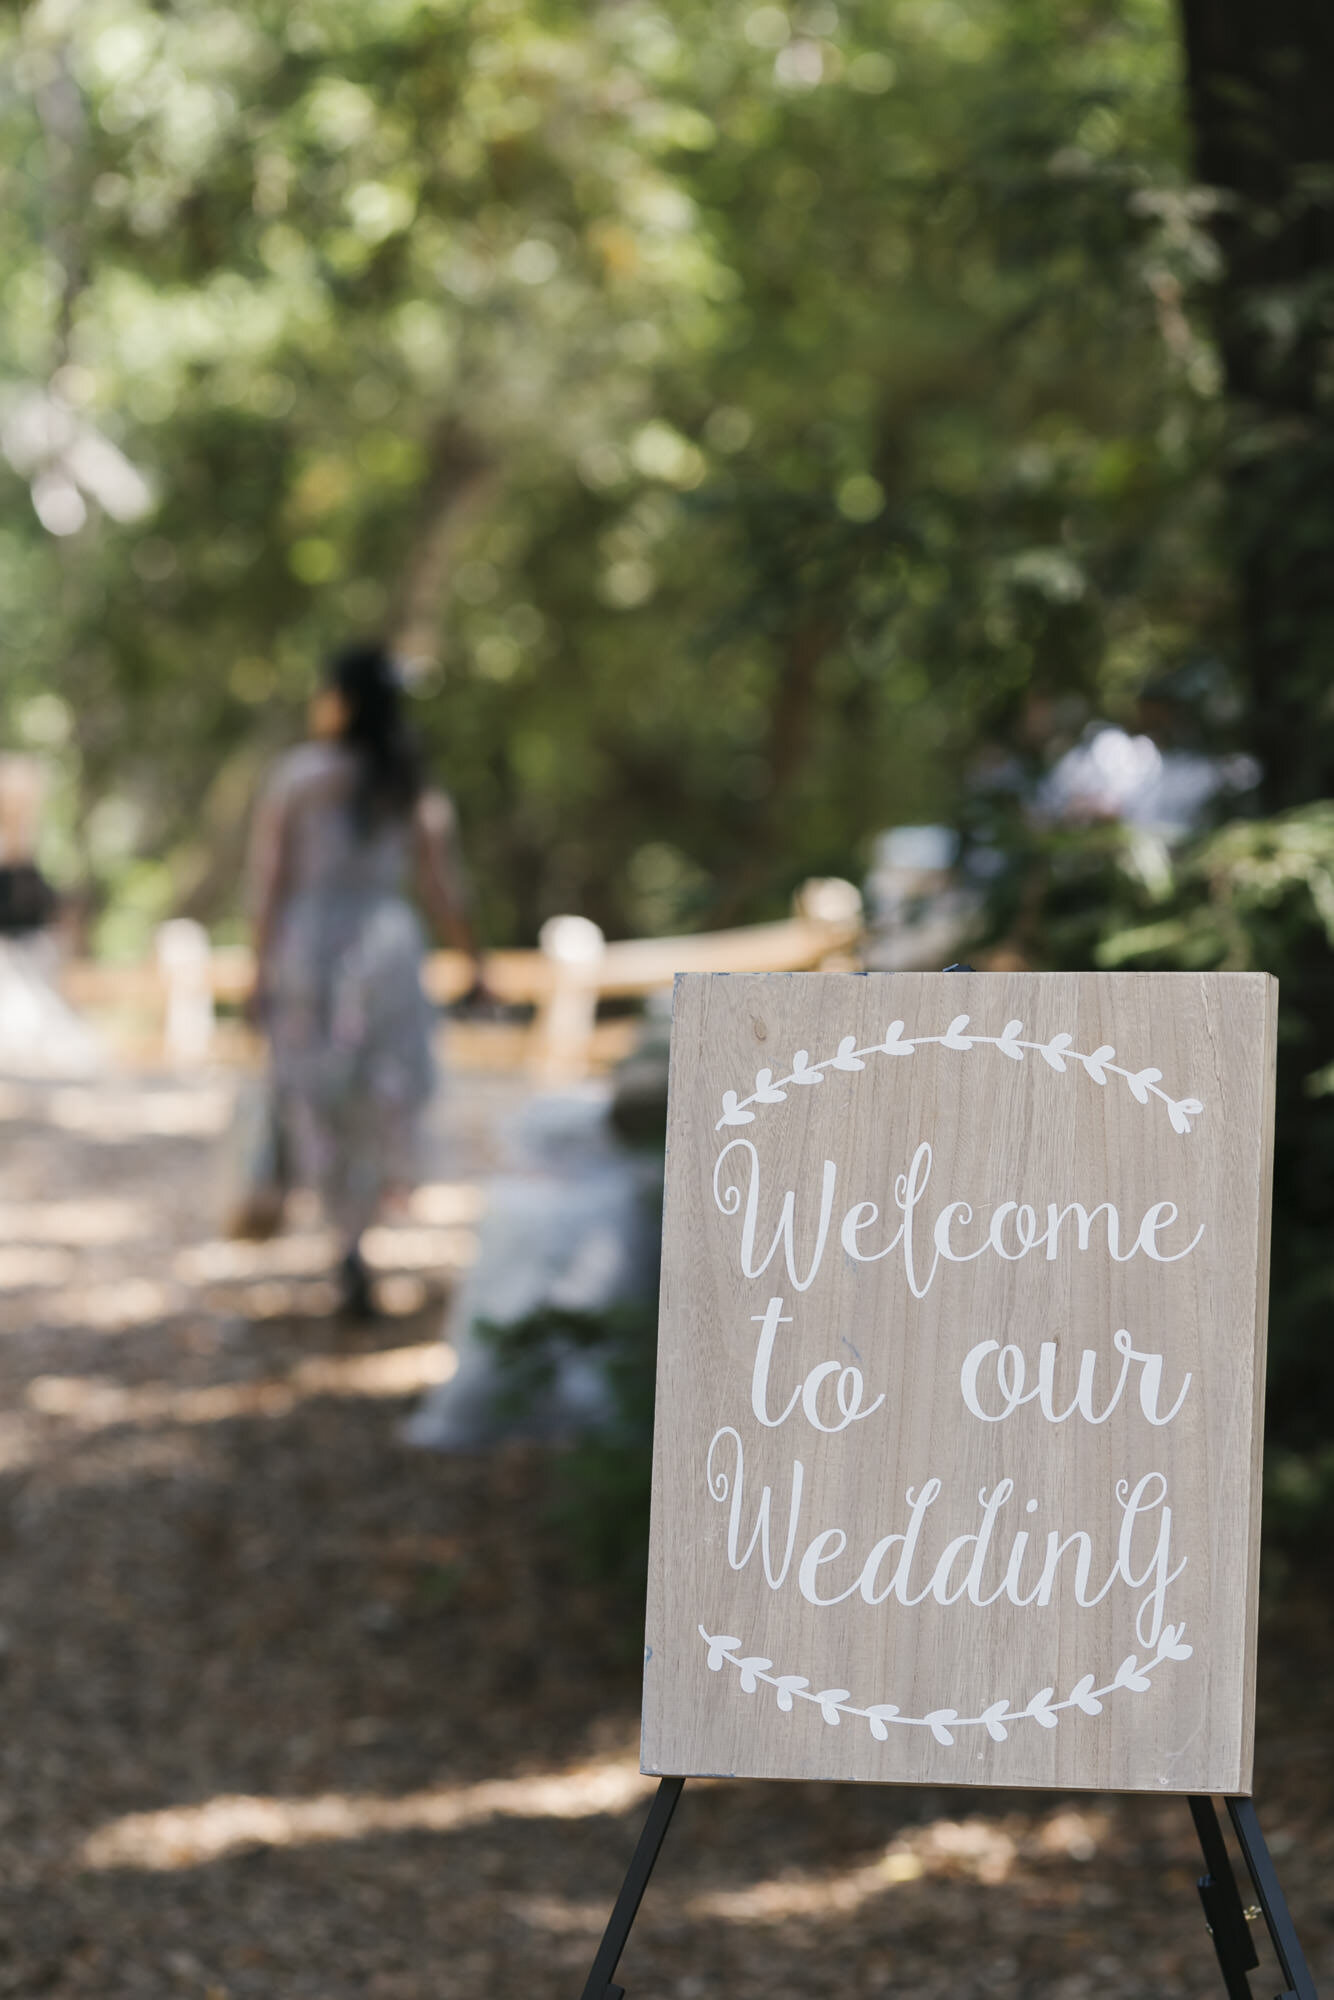 Welcome sign greets guests at picnic wedding